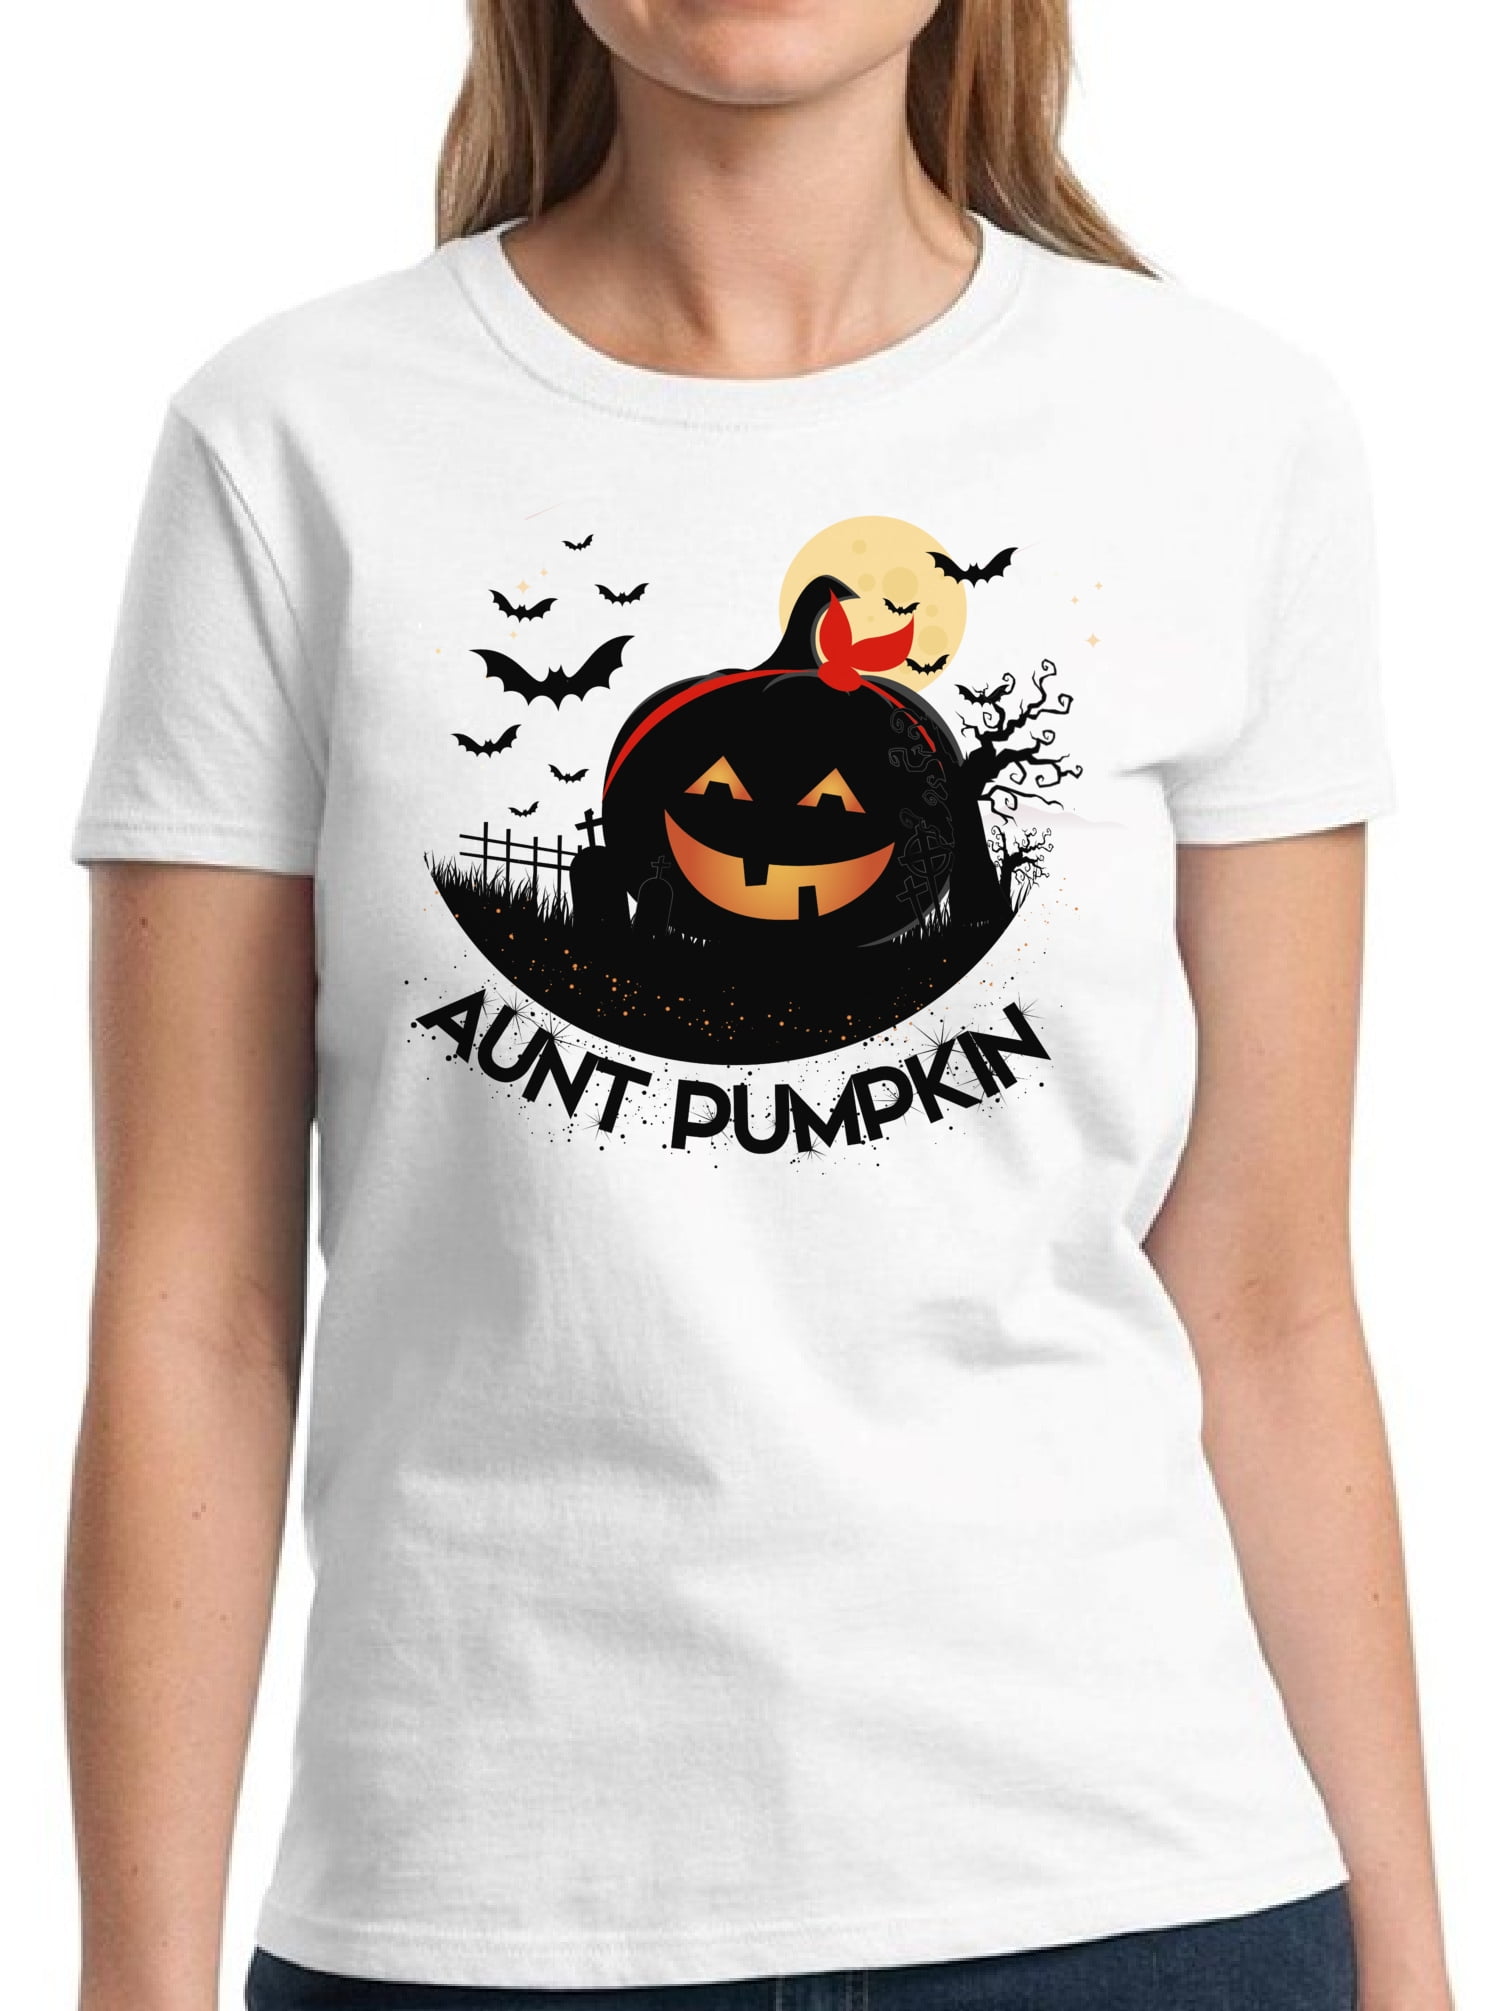 Aunt Pumpkin Halloween T Shirt for Women S L XL 2XL 3XL Graphic Tee Happy Halloween Outfit Gift Funny Holiday Tee T-Shirt Ladies - Walmart.com